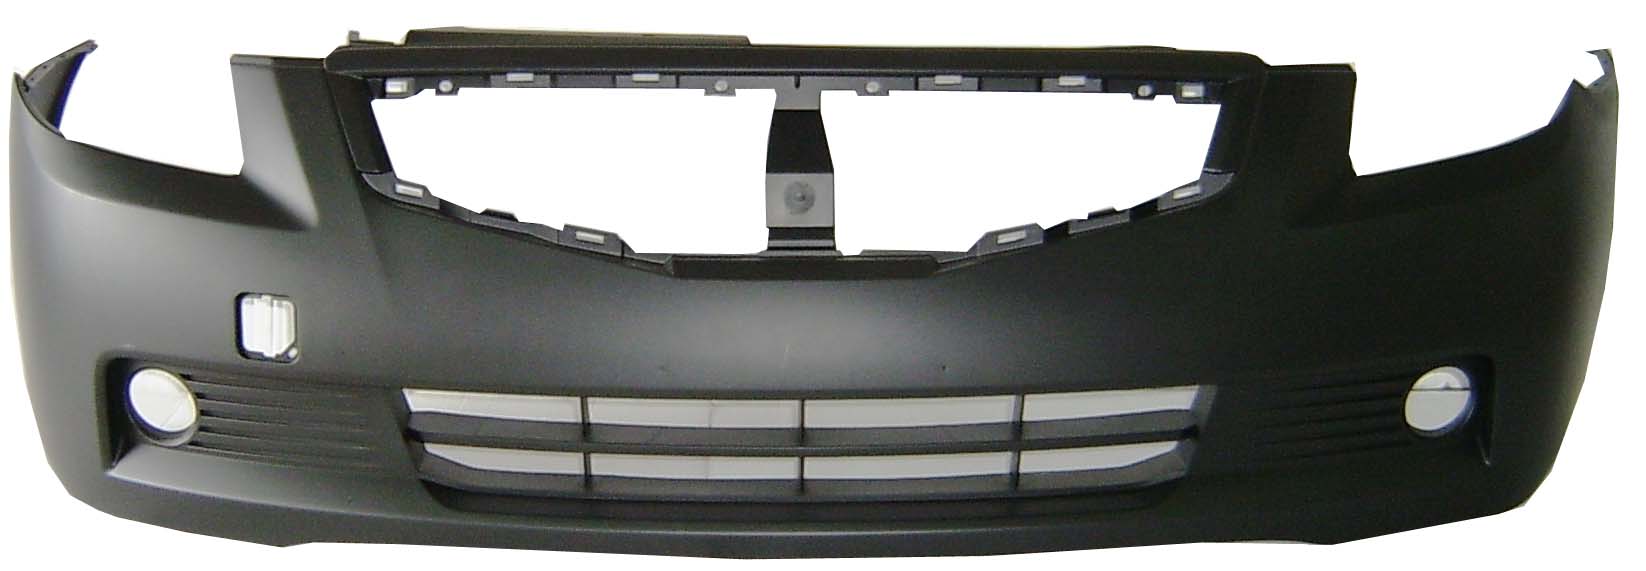 Aftermarket BUMPER COVERS for NISSAN - ALTIMA, ALTIMA,08-09,Front bumper cover